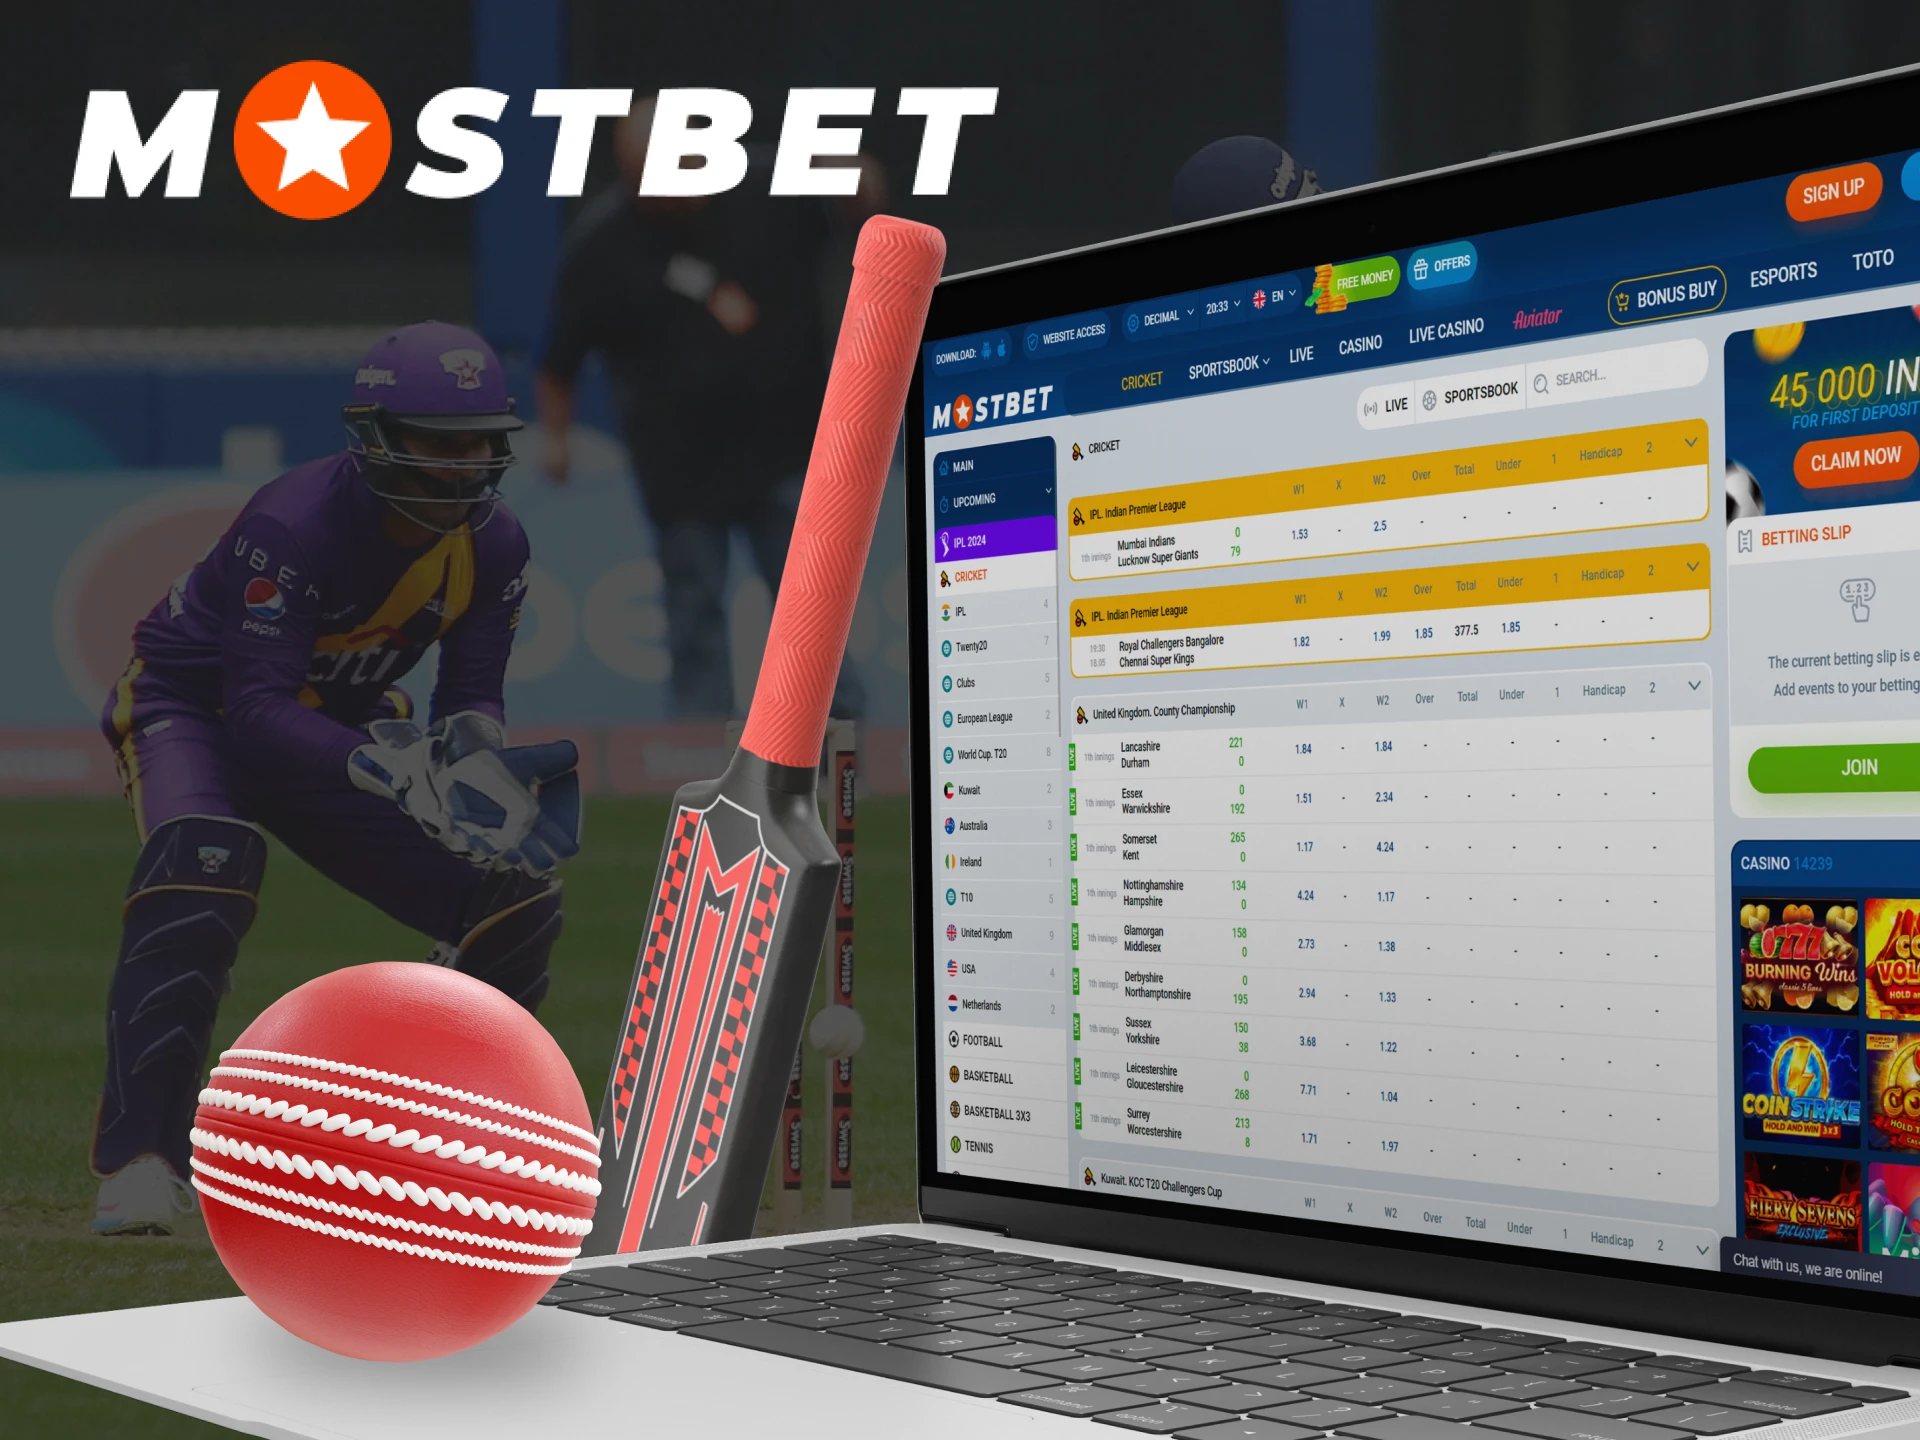 Choose your favorite cricket event and place a bet on it at Mostbet.